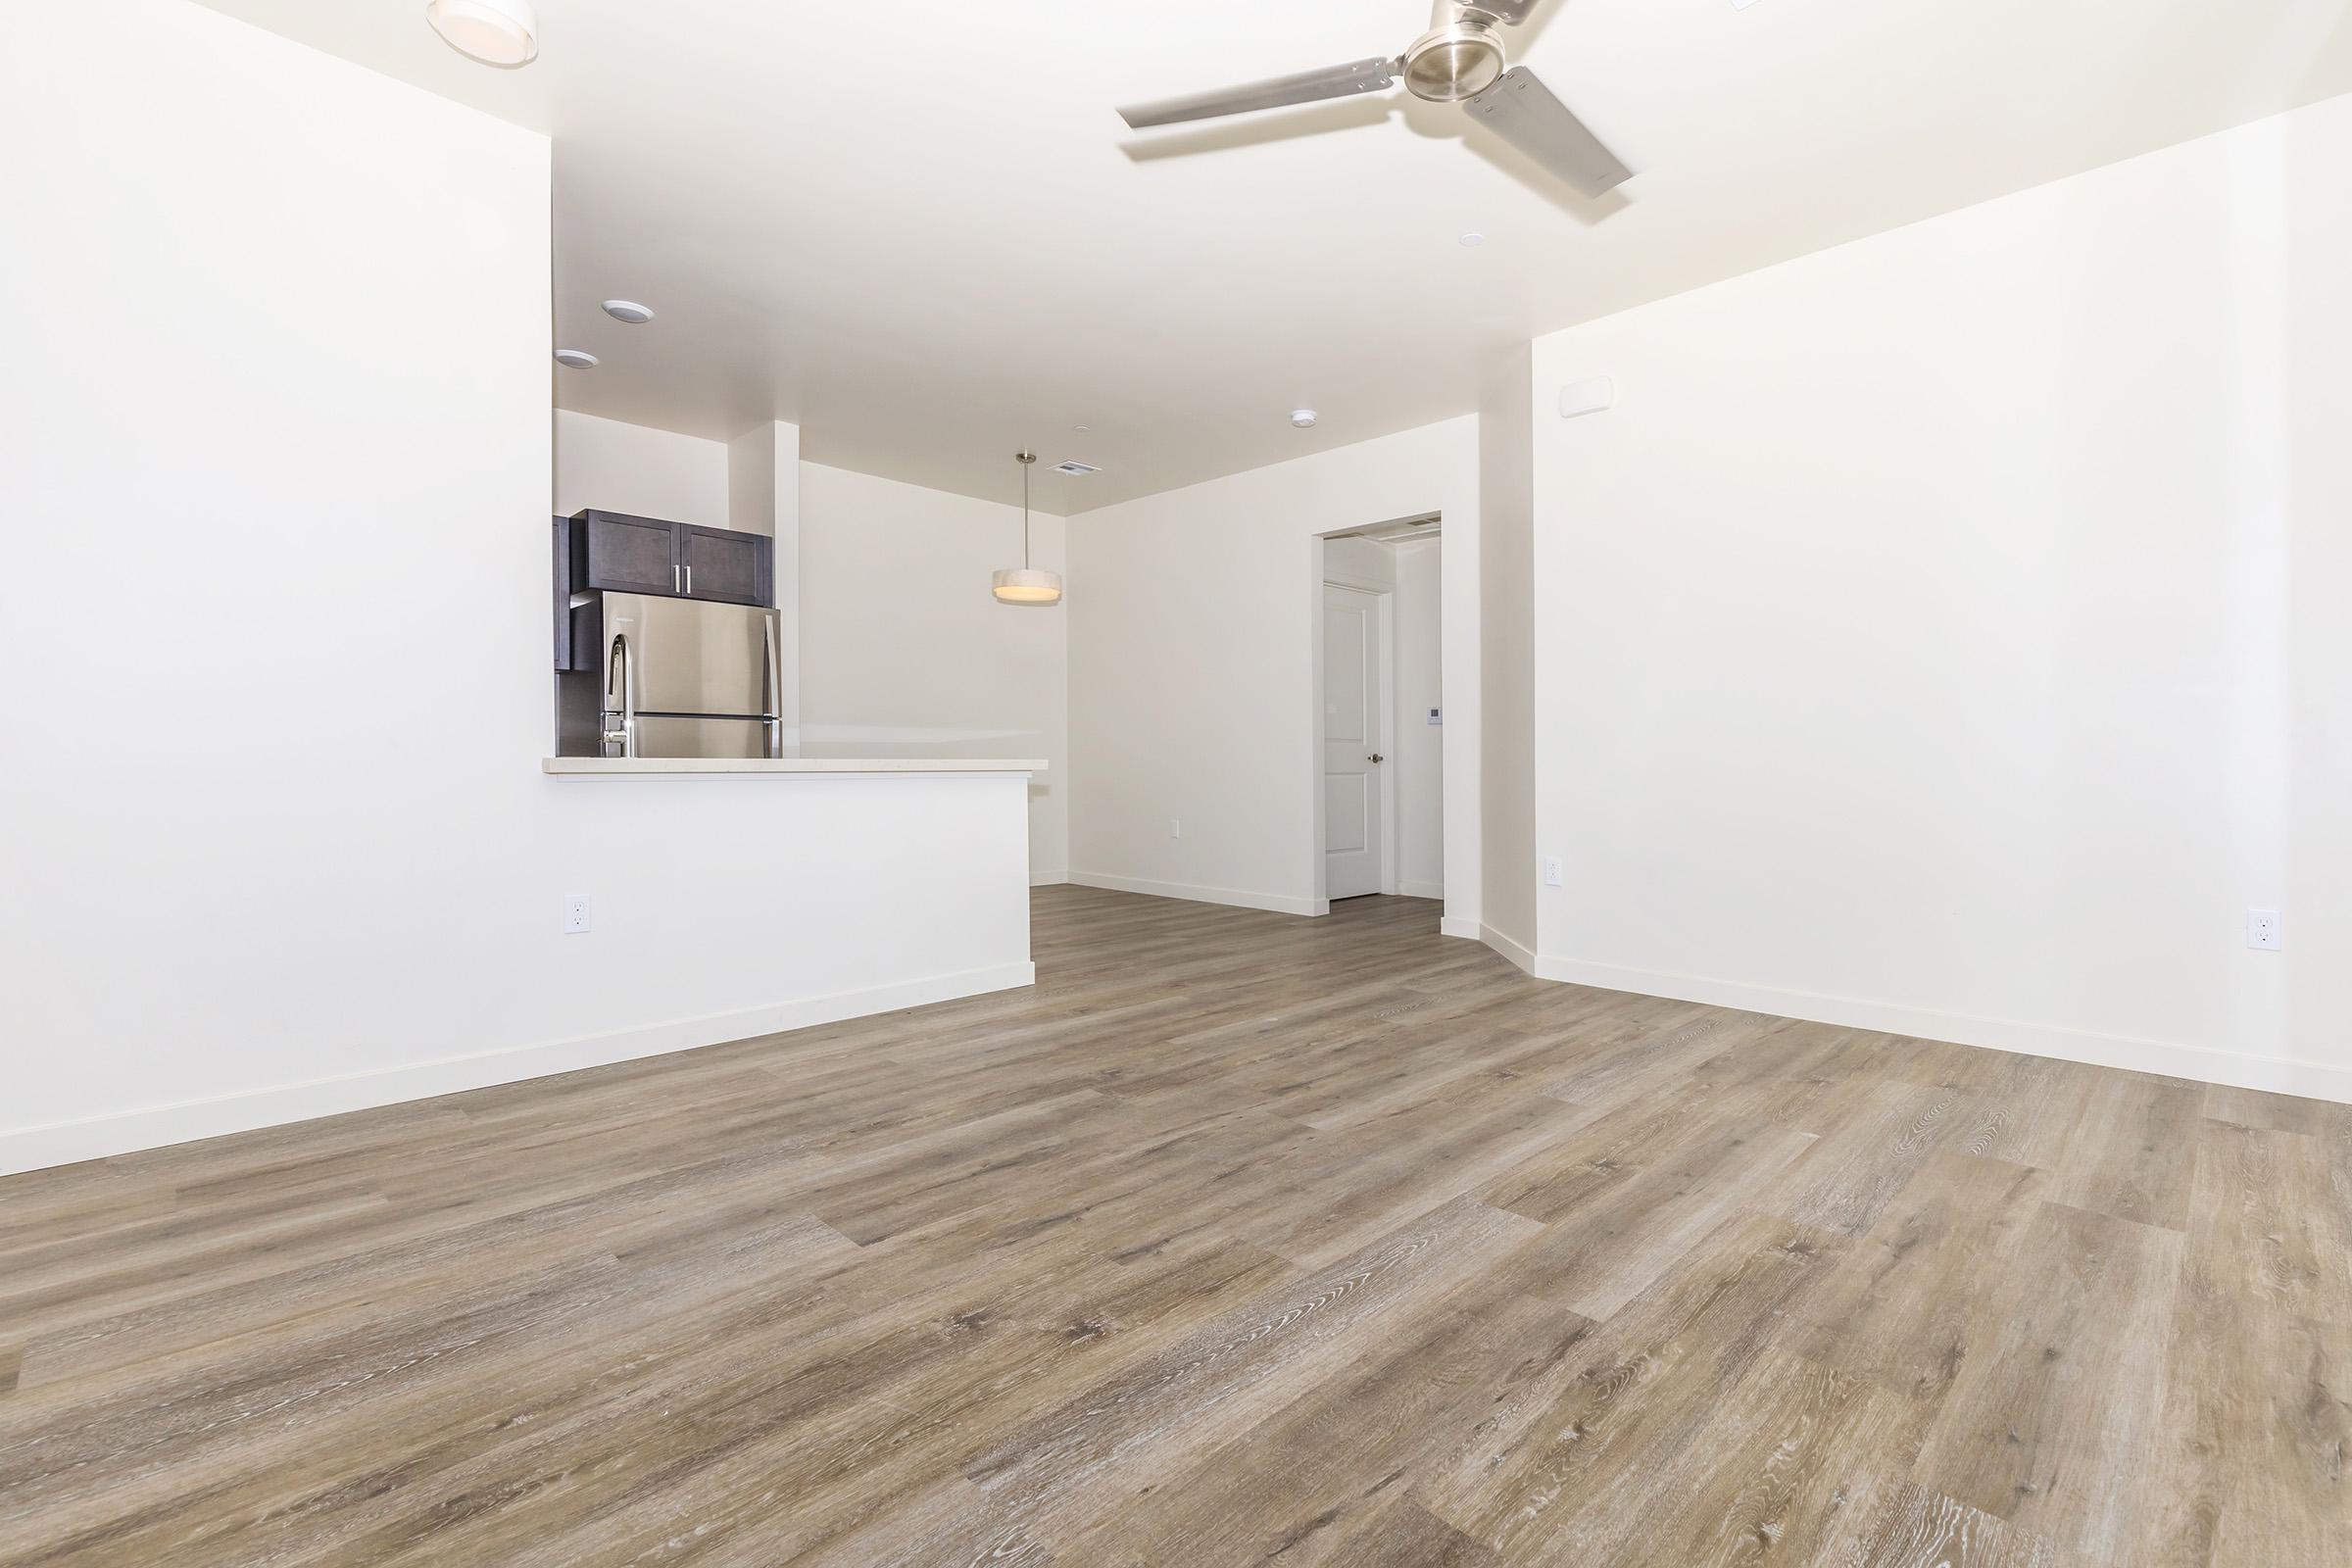 WOOD-STYLE FLOORING THROUGHOUT